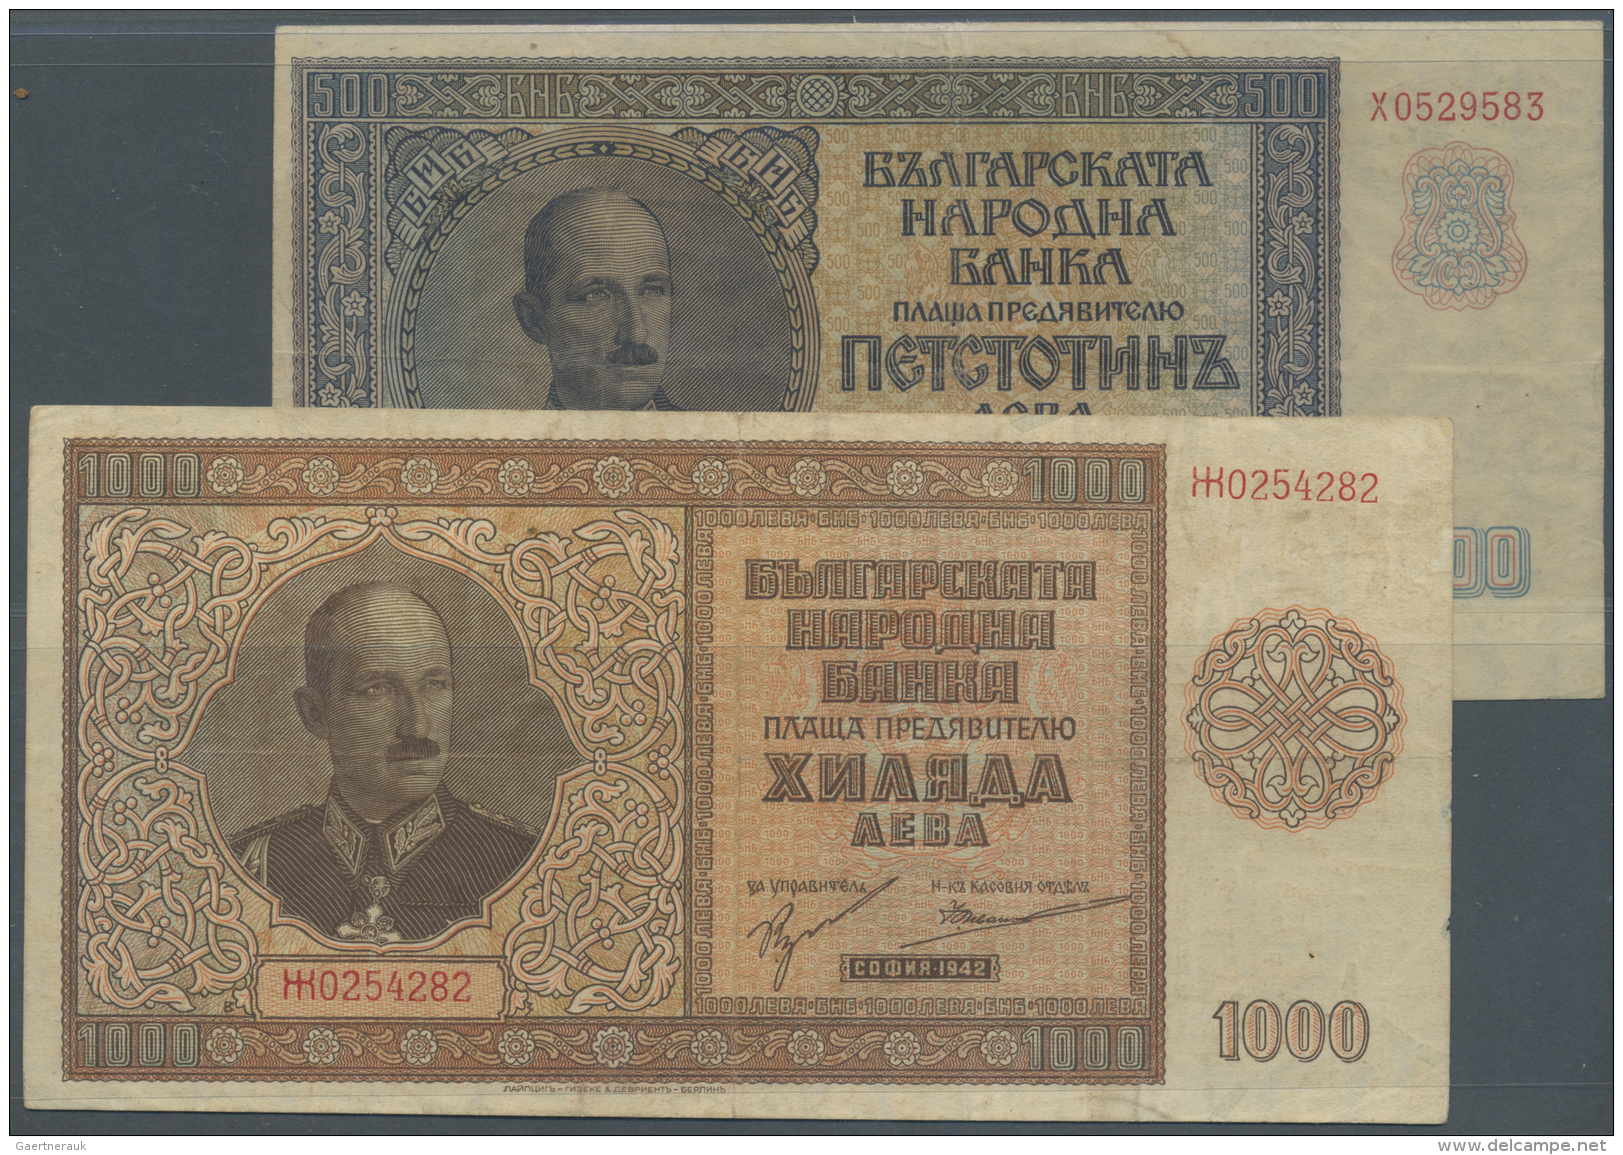 Bulgaria / Bulgarien: Pair With 500 And 1000 Leva 1942, P.60, 61, Both In Used Condition With Several Folds And Stained - Bulgaria